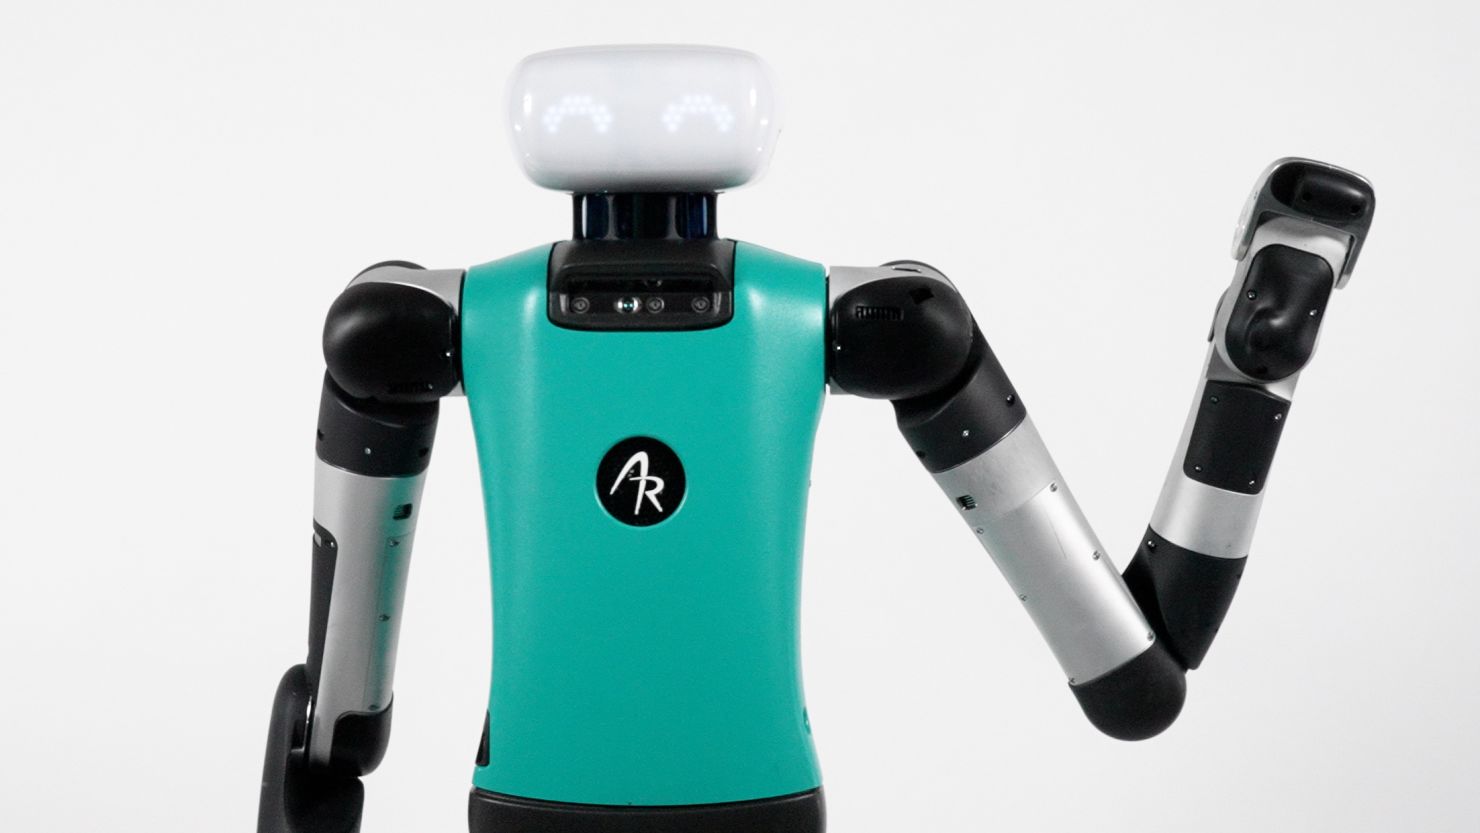 This company envisions a future where humanoid robots are as ubiquitous as  smartphones